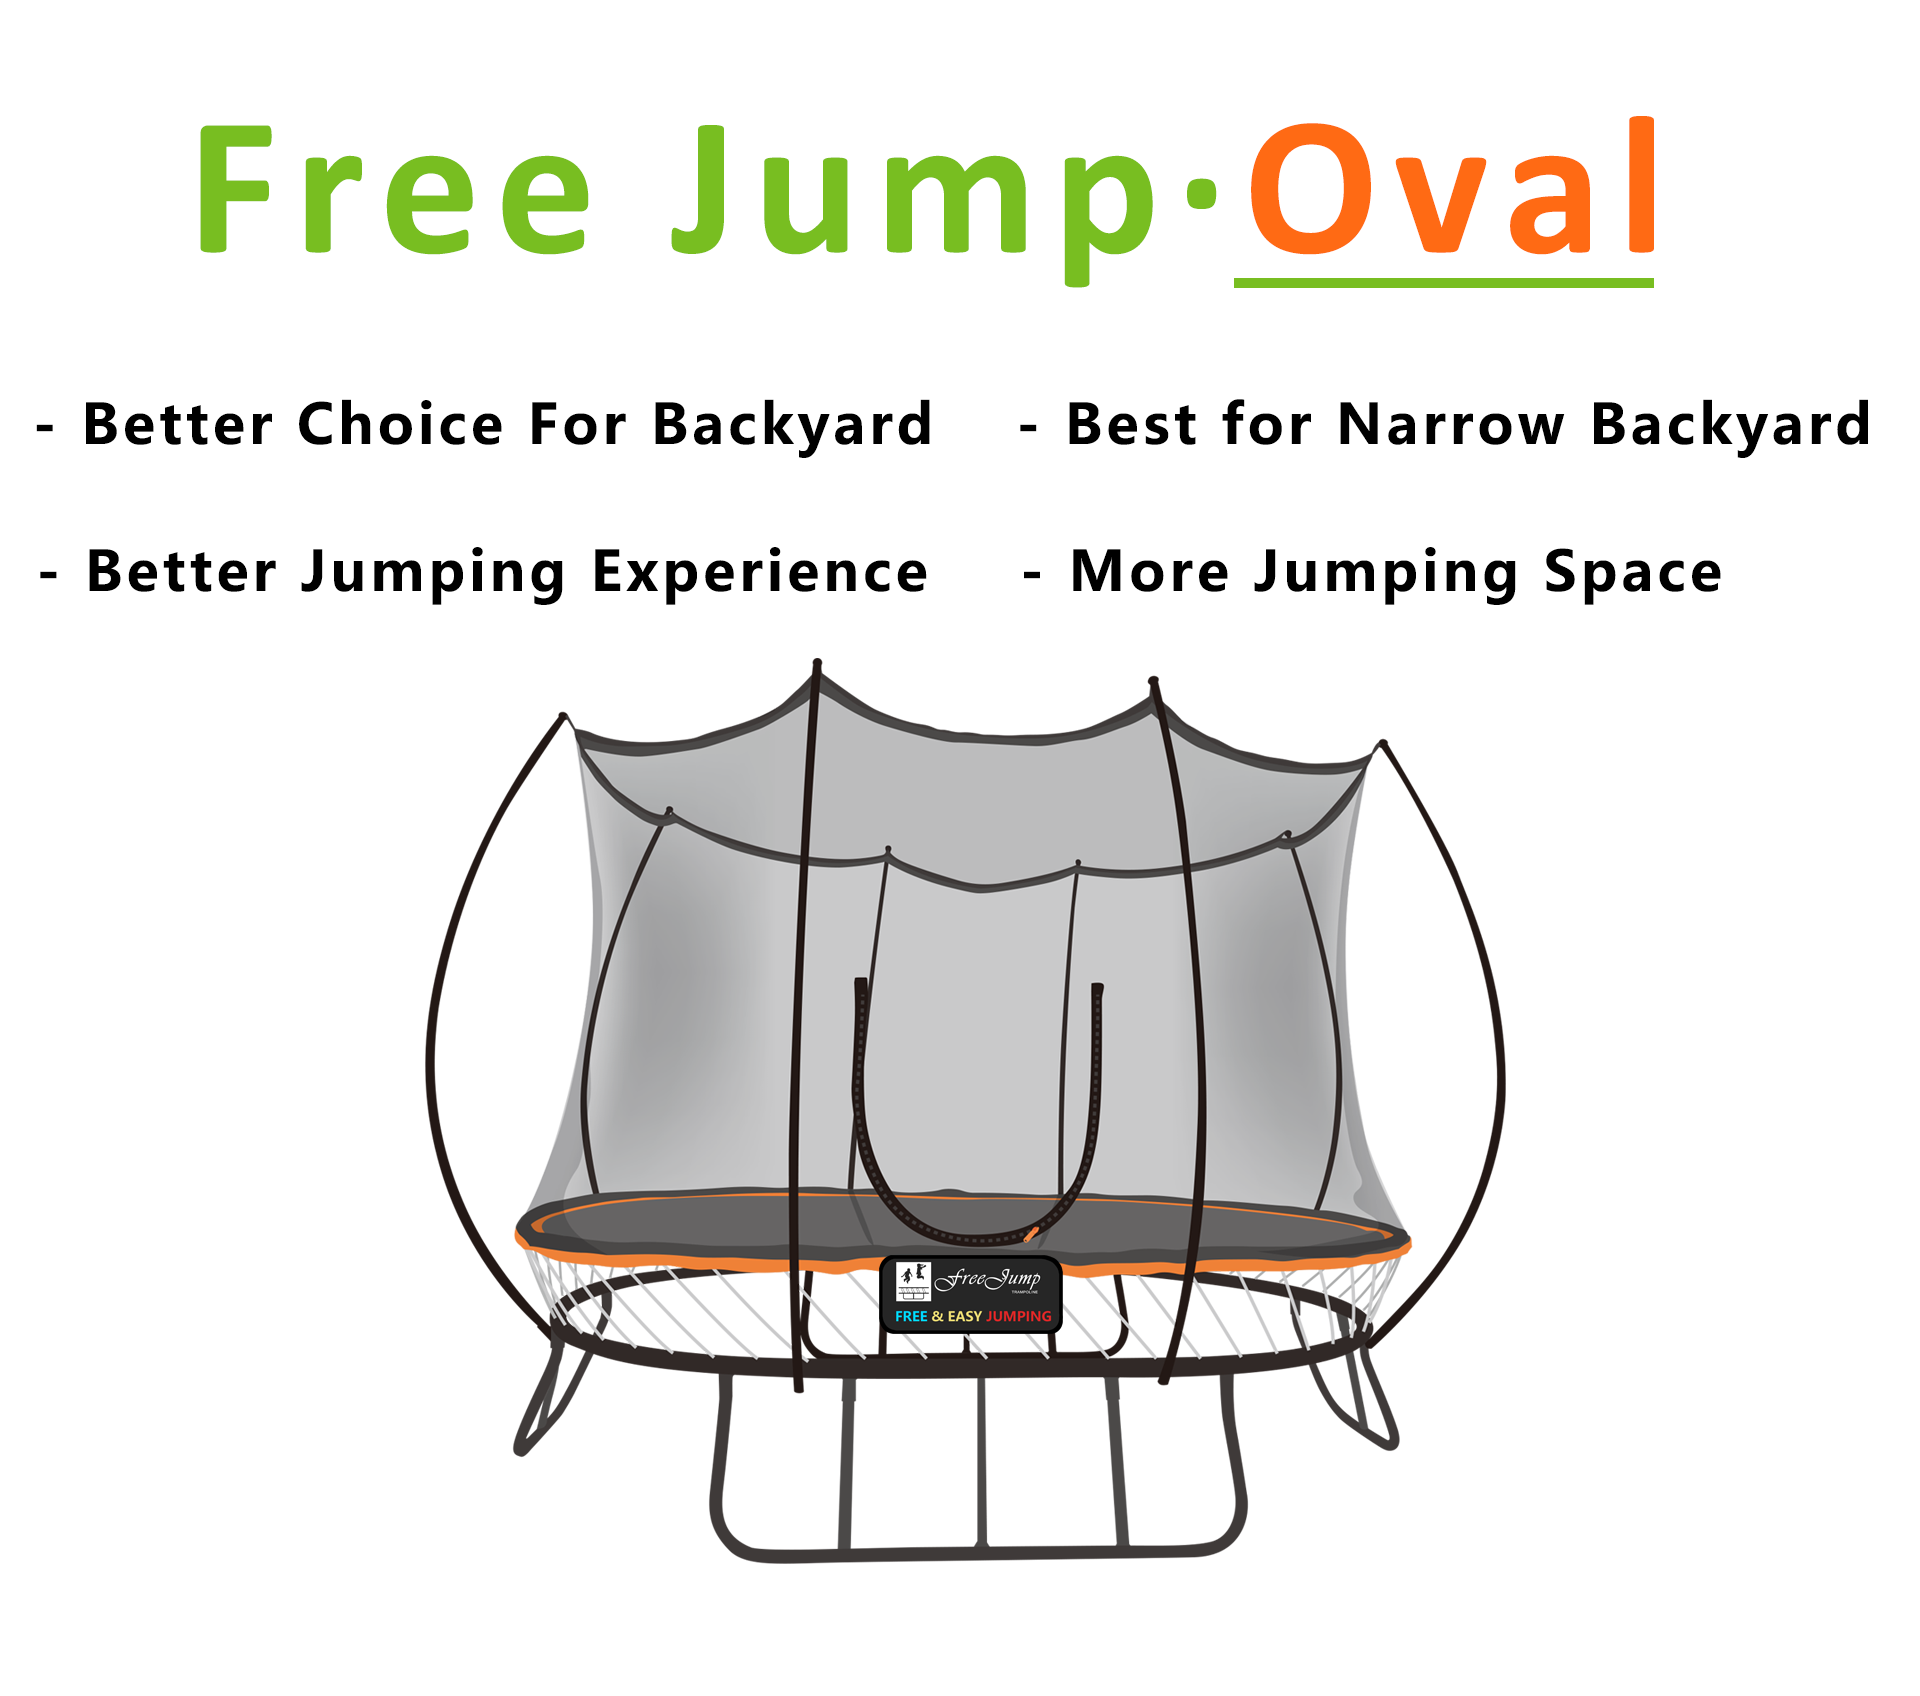 Six benefits of Best Square trampoline exercise for children 